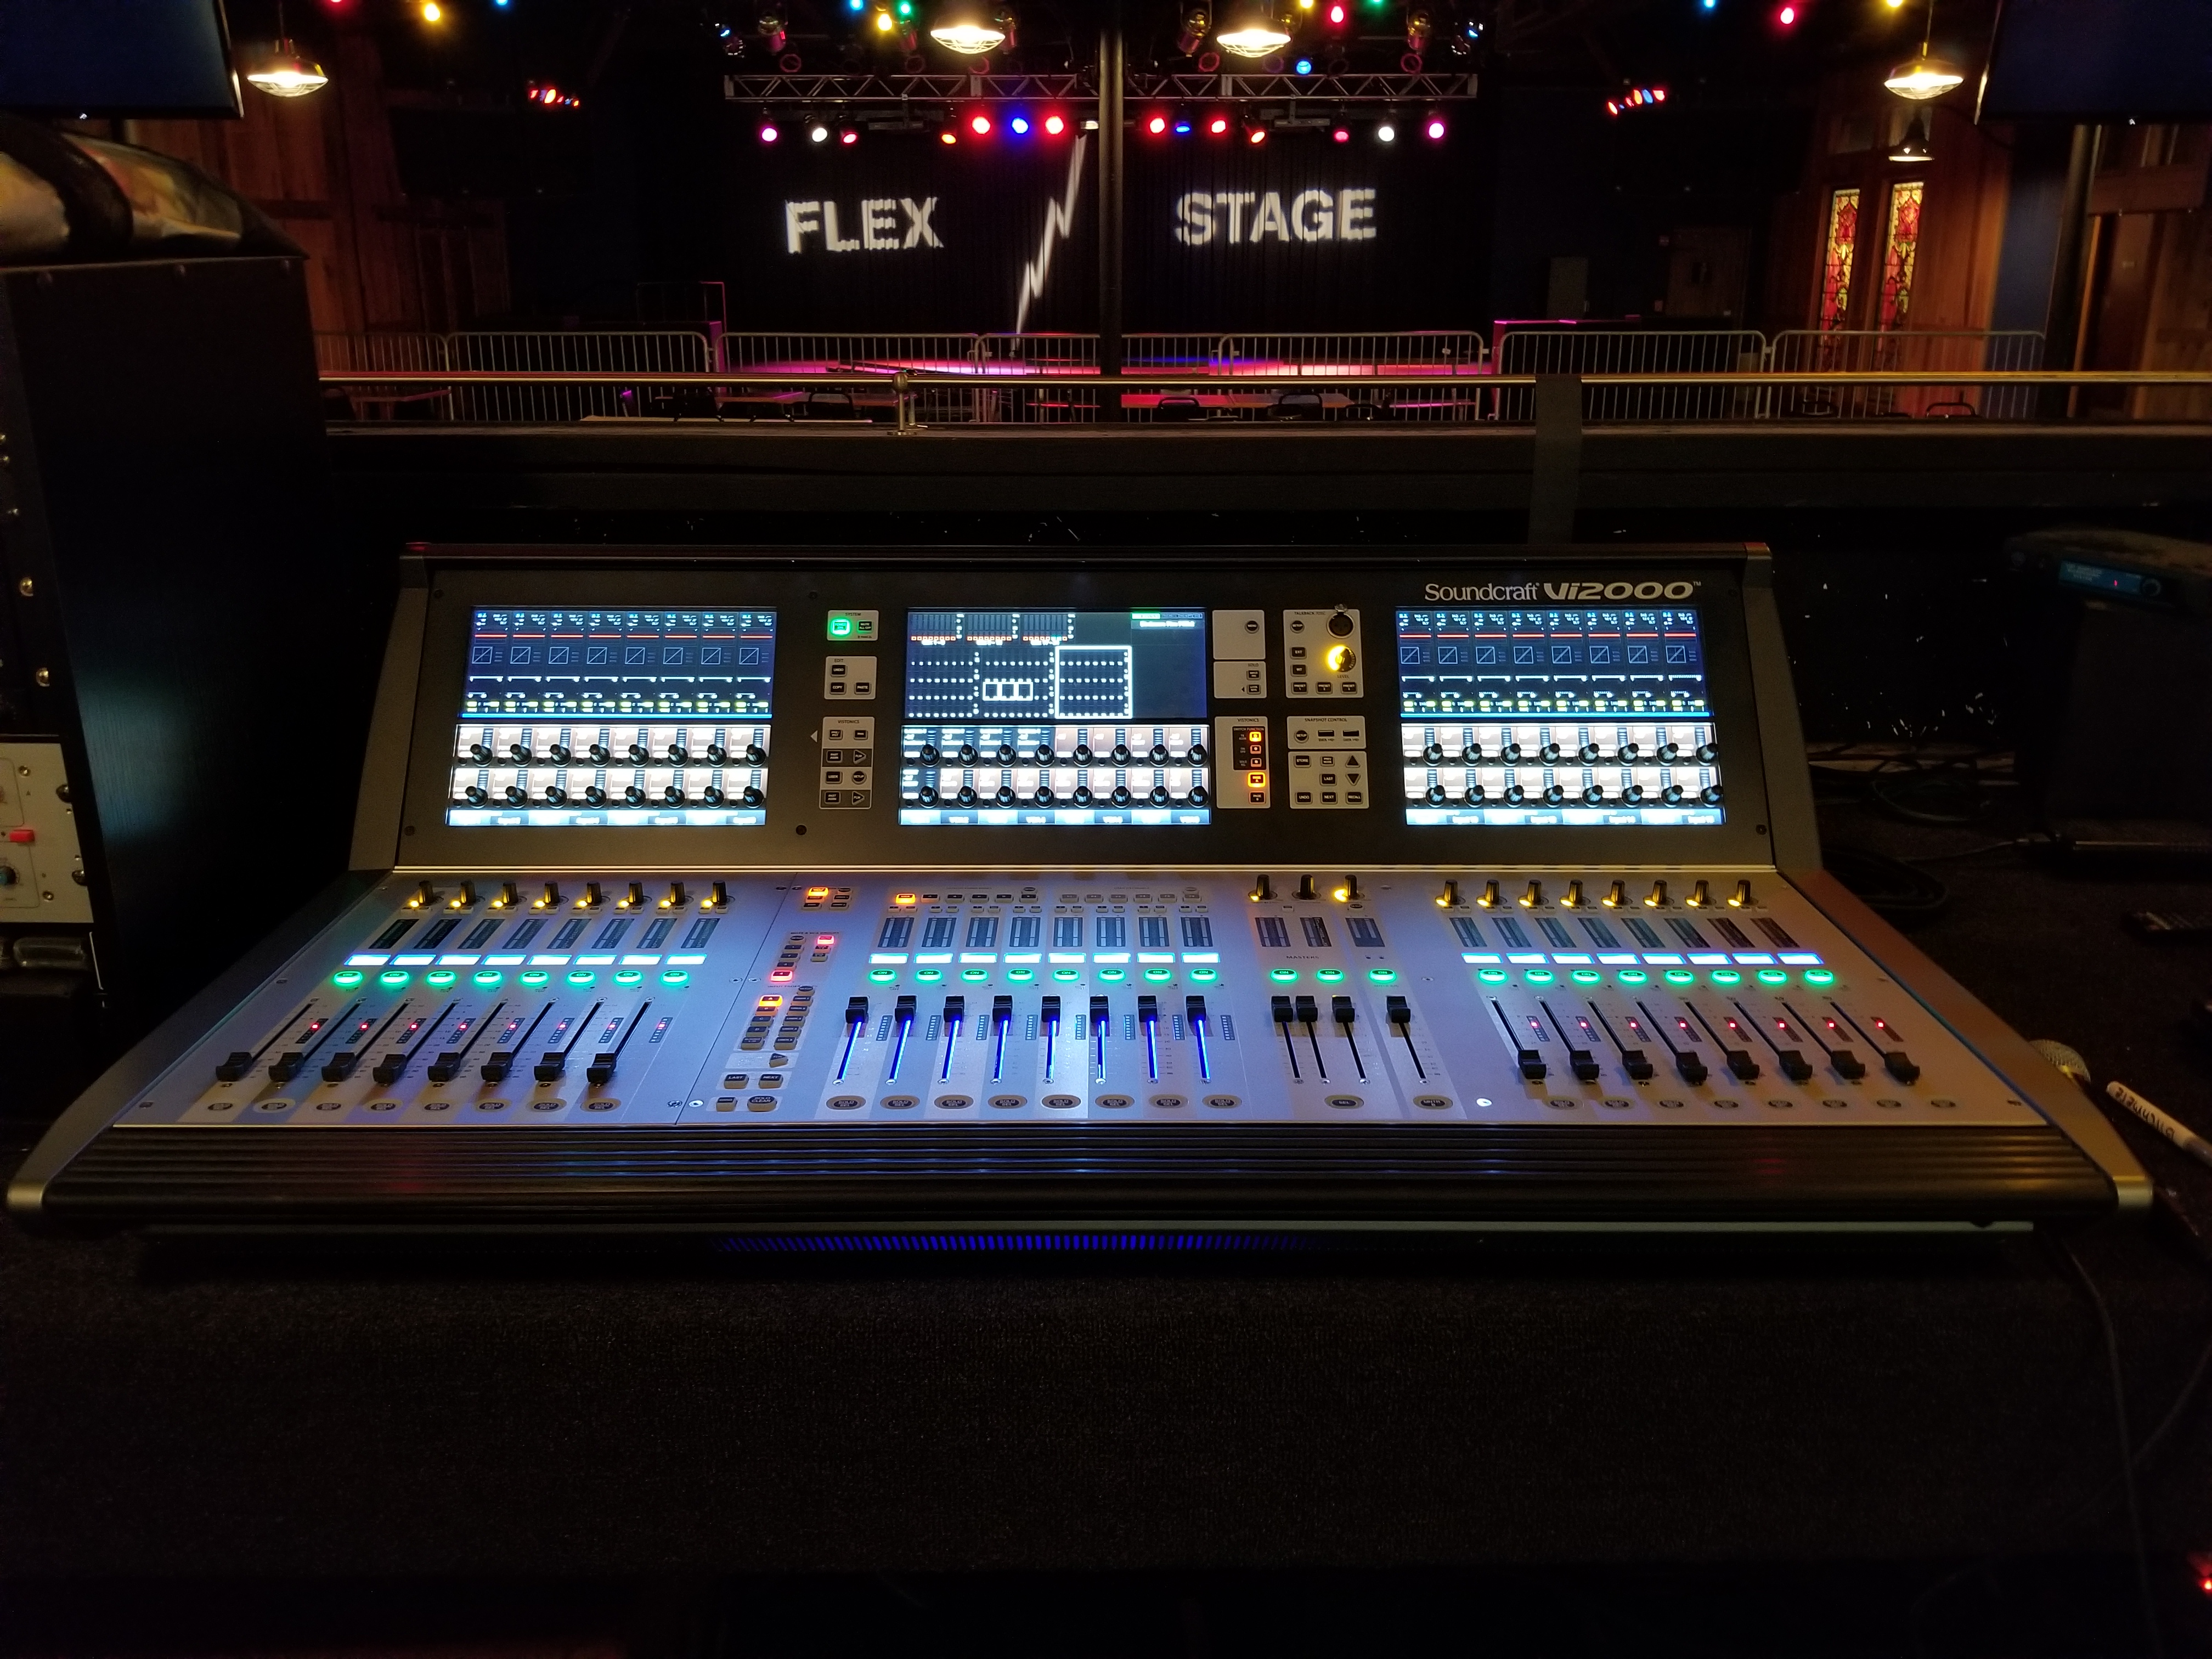 Birchmere Music Hall Delivers Exceptional Sound Quality with Soundcraft Vi Series Consoles